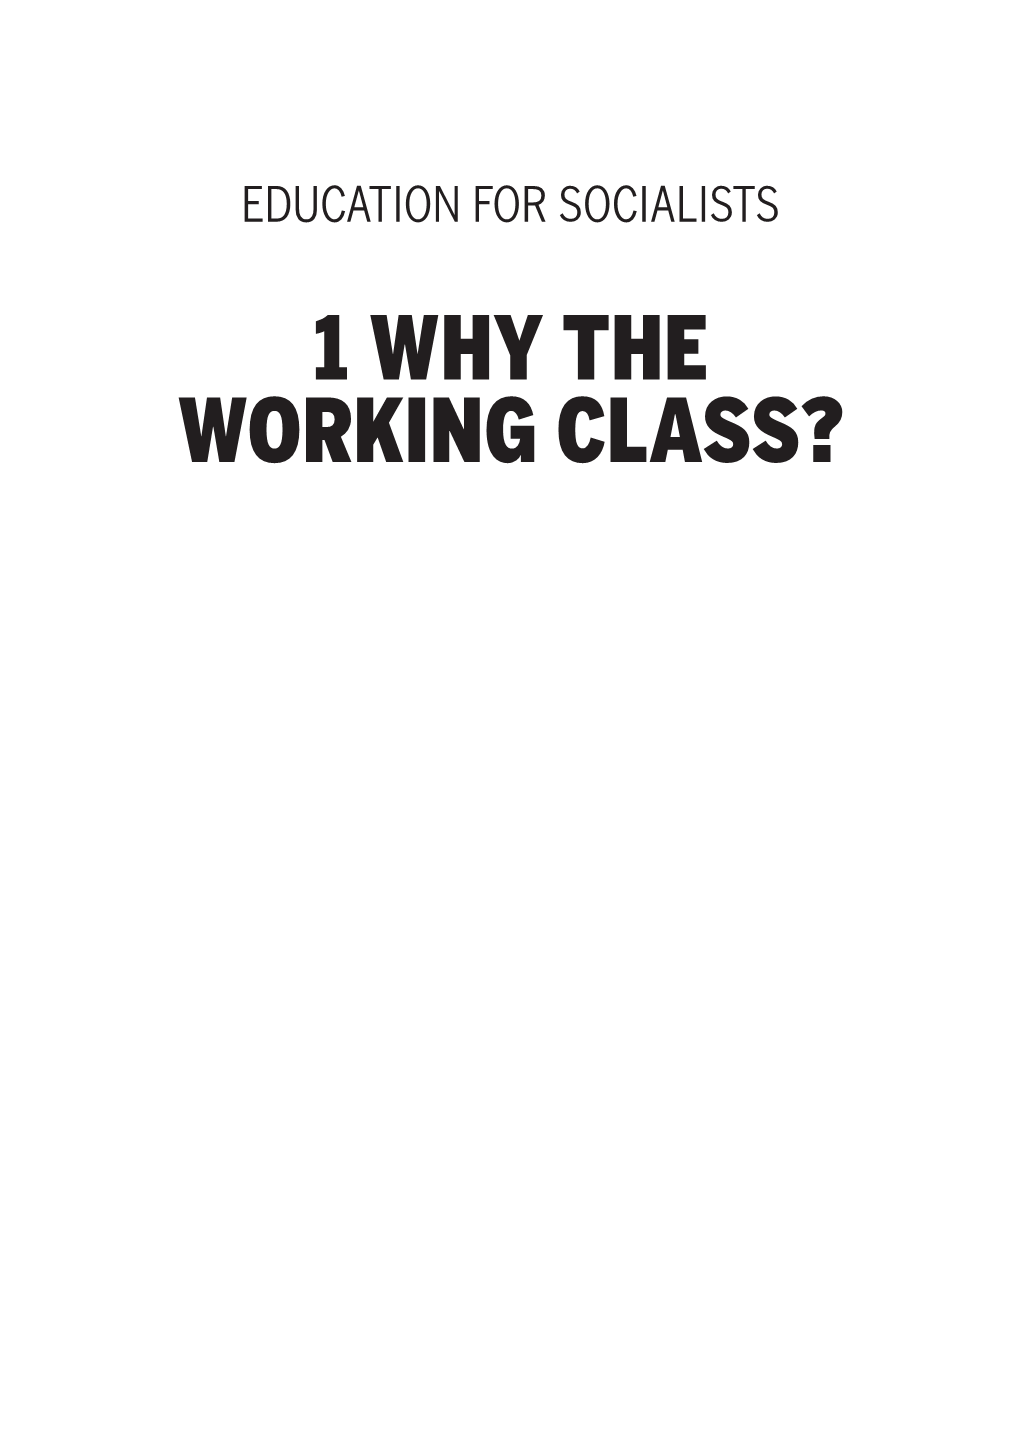 1 Why the Working Class? 2 Education for Socialists